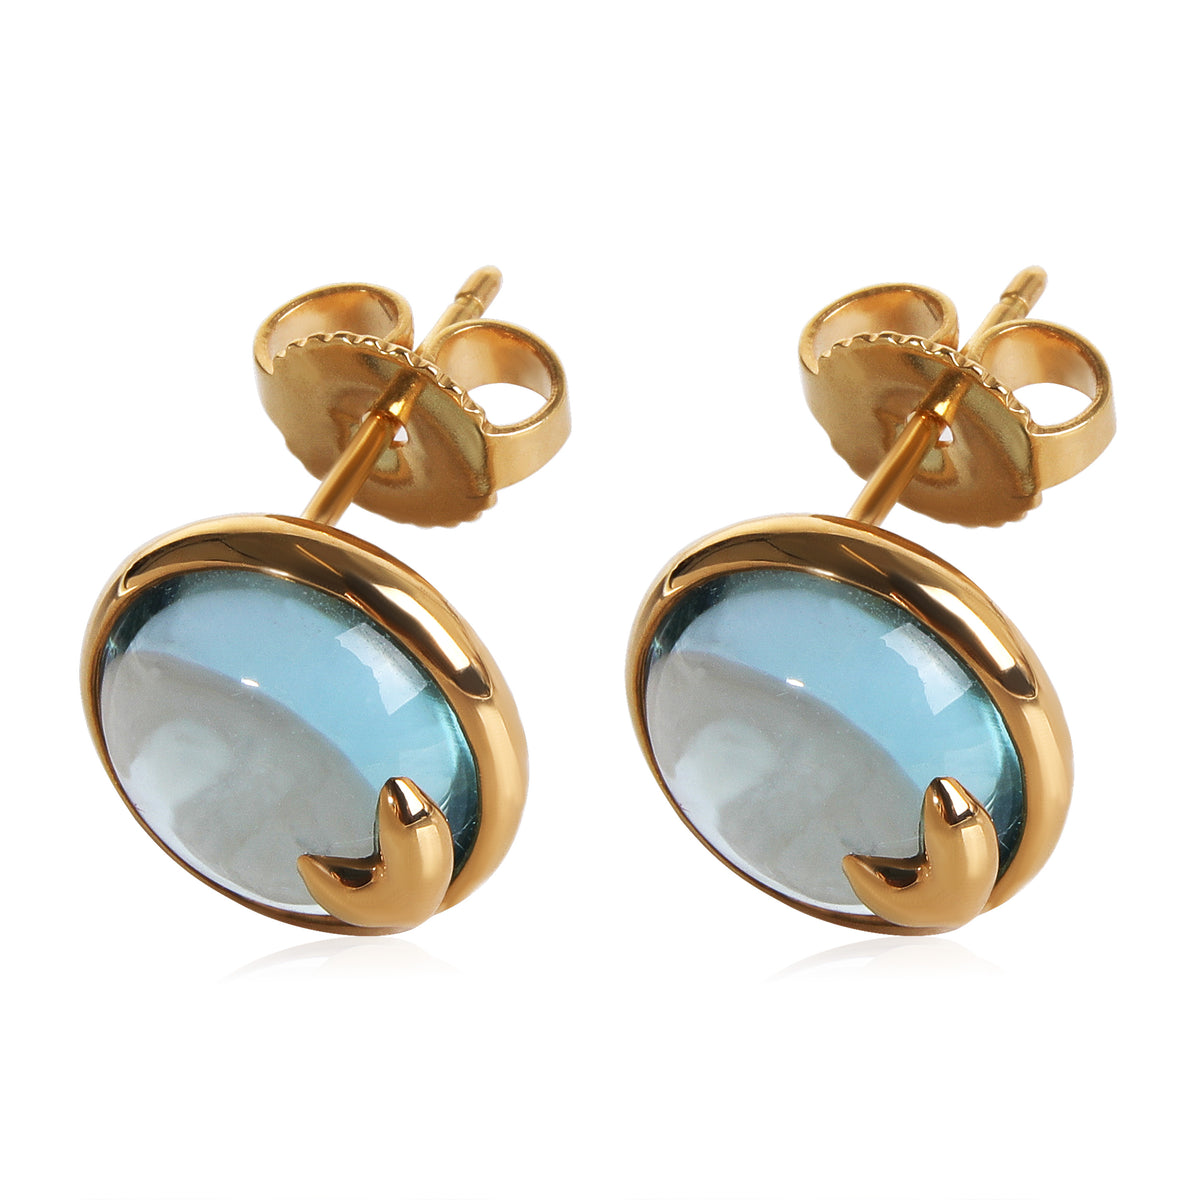 Tiffany & Co. Paloma Picasso Olive Leaf Blue Topaz Earrings in 18k Yellow Gold